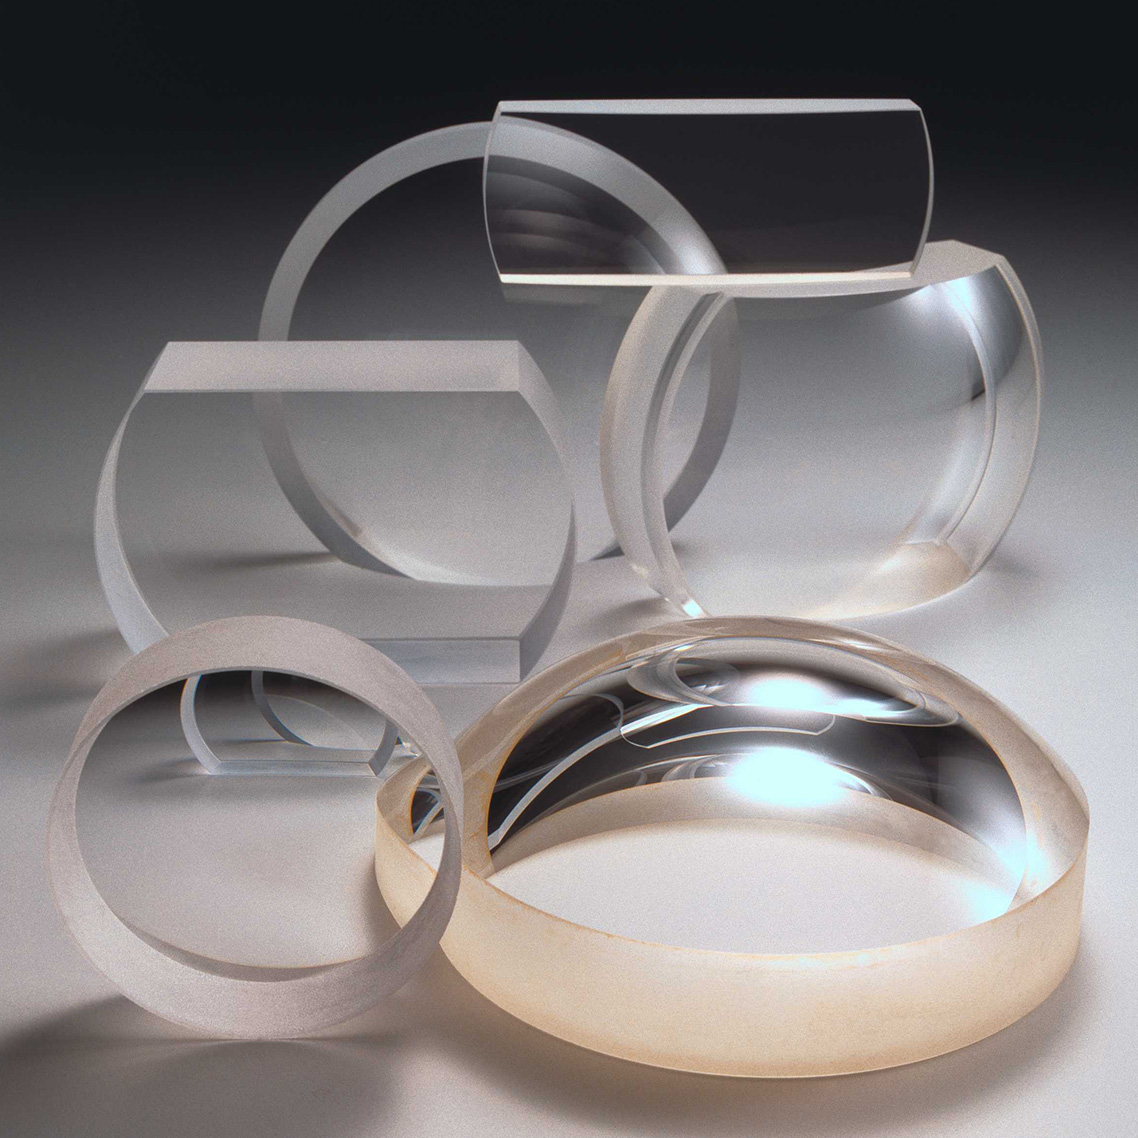 High Purity Fused Silica | HPFS Fused Silica | Corning